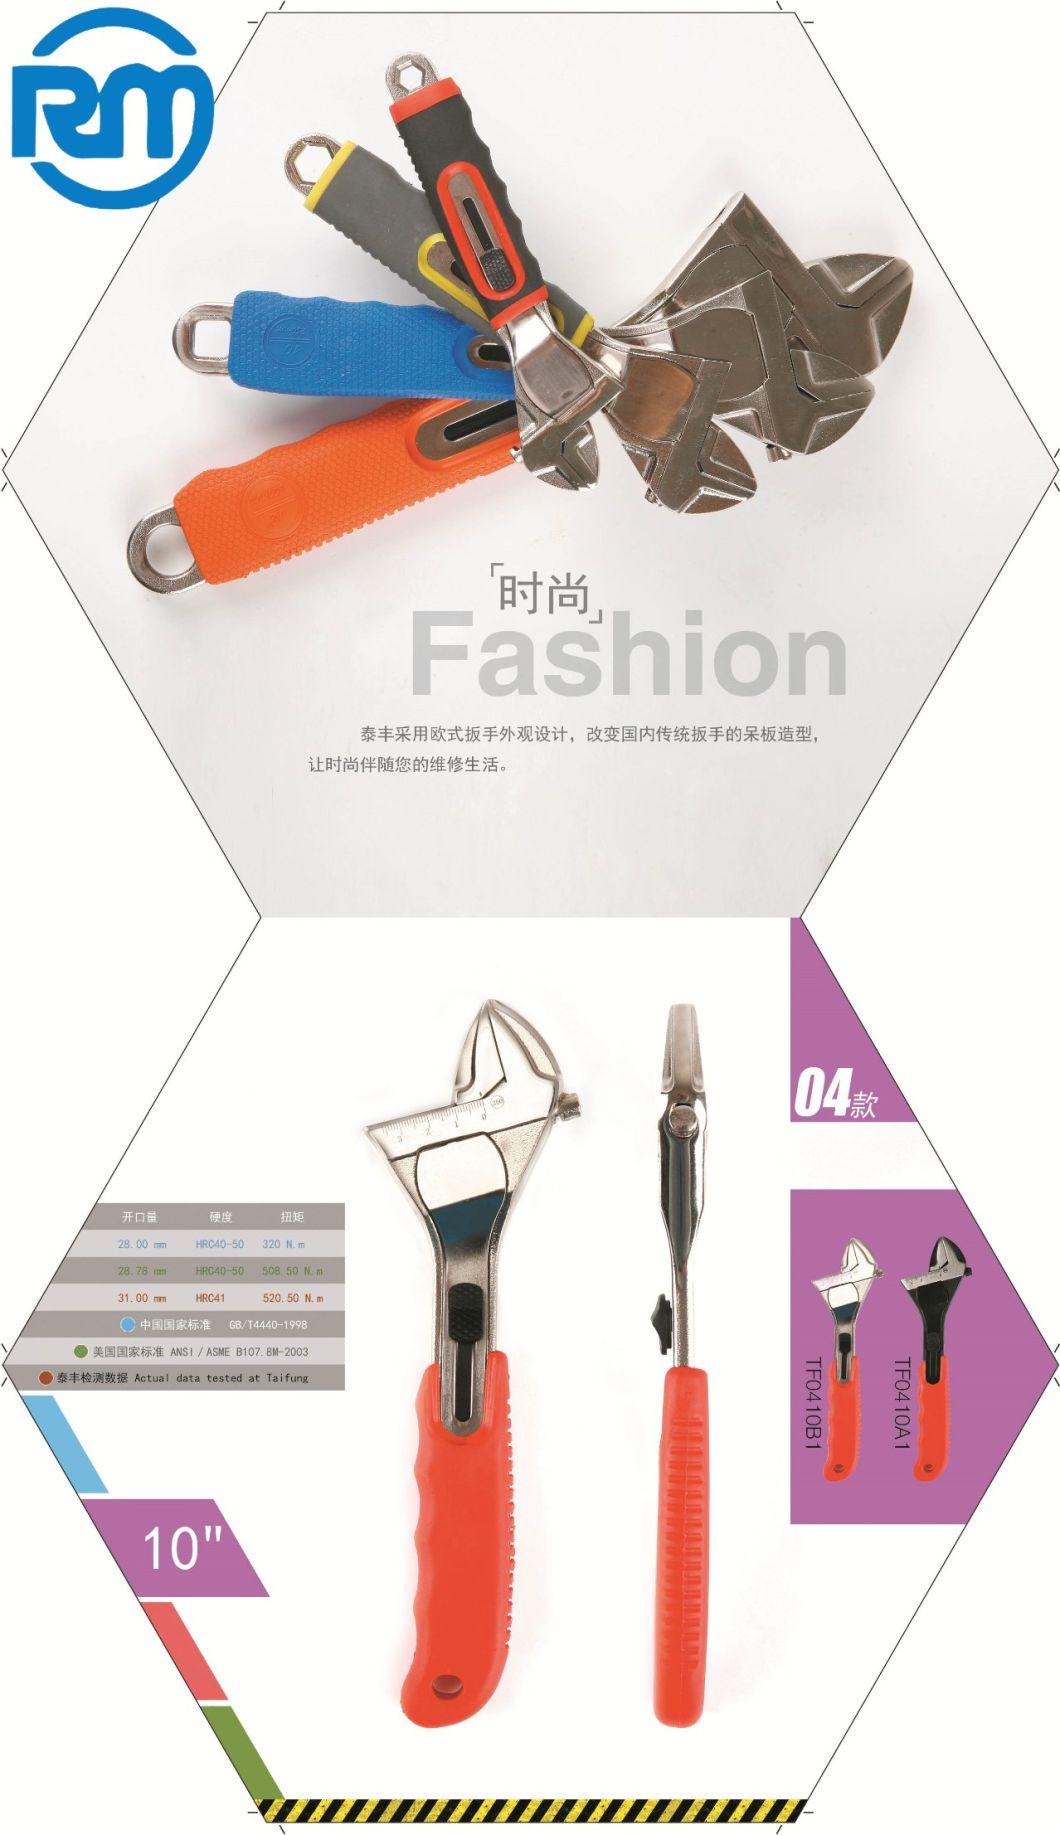 Super Multi Function Double Ended Ratchet Gear Combination Adjustable Wrench Spanner Set Tools Kits Professional Quality Sliding Adjusting Button